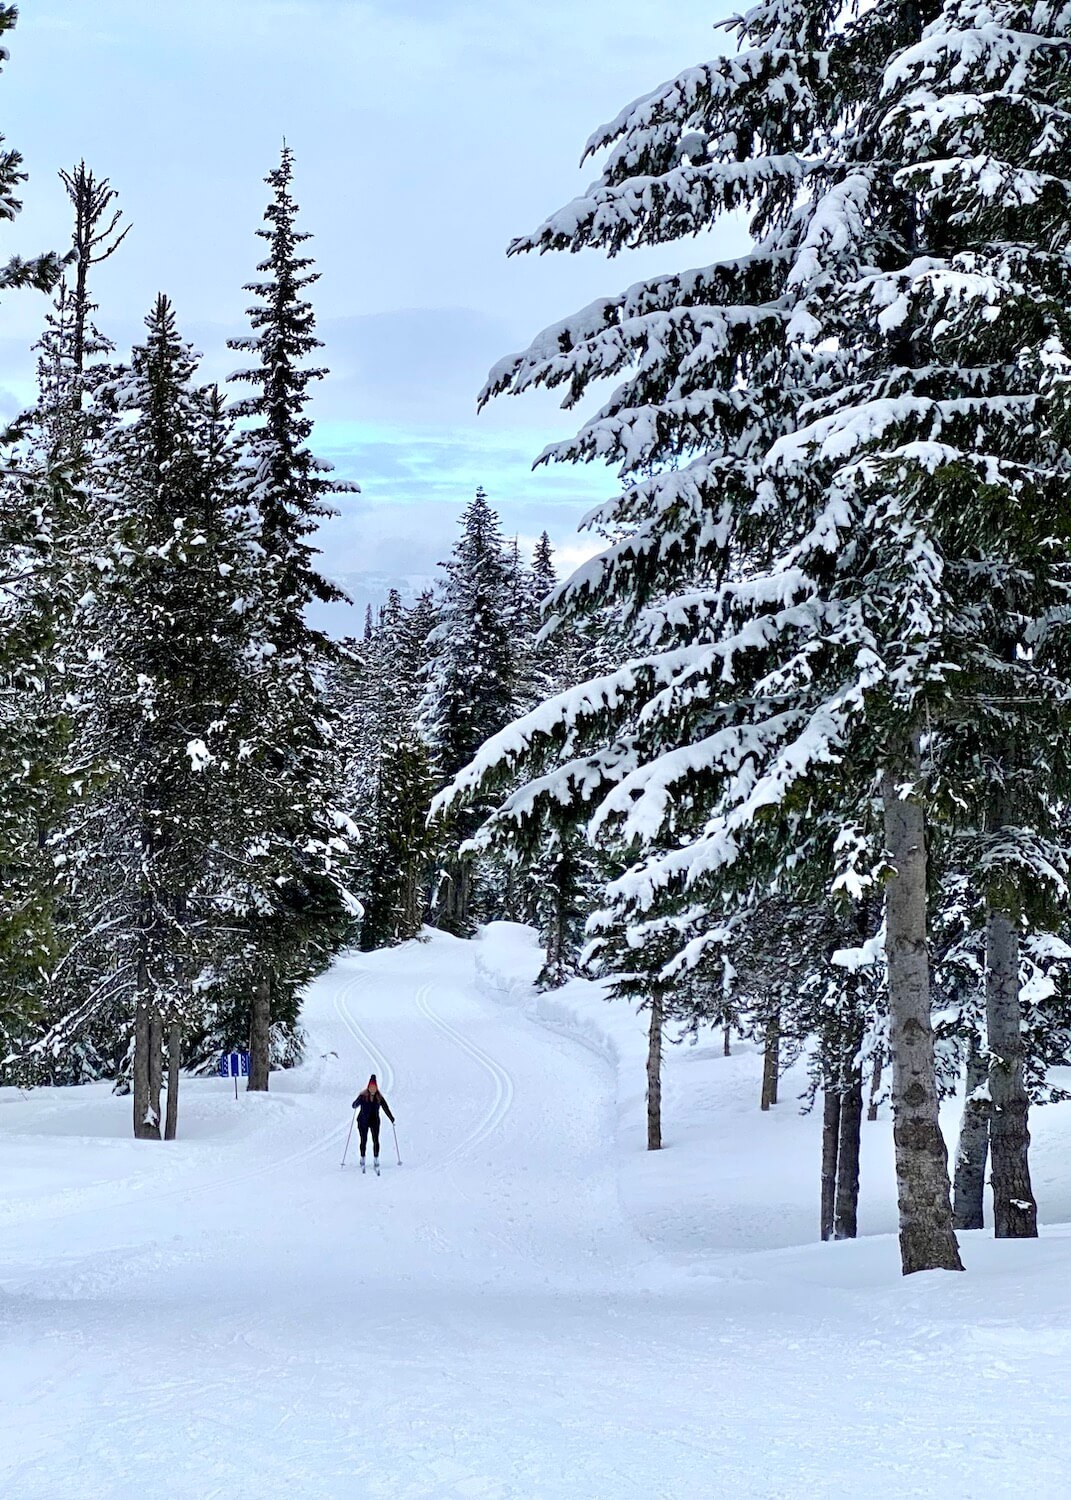 A lone cross country skier makes her way up a groomed pathway of snow amongst fir trees covered with snowy powder that bends branches down to the ground.  She is skiing in the Nordic Center of White Pass Ski Resort in Washington State. 